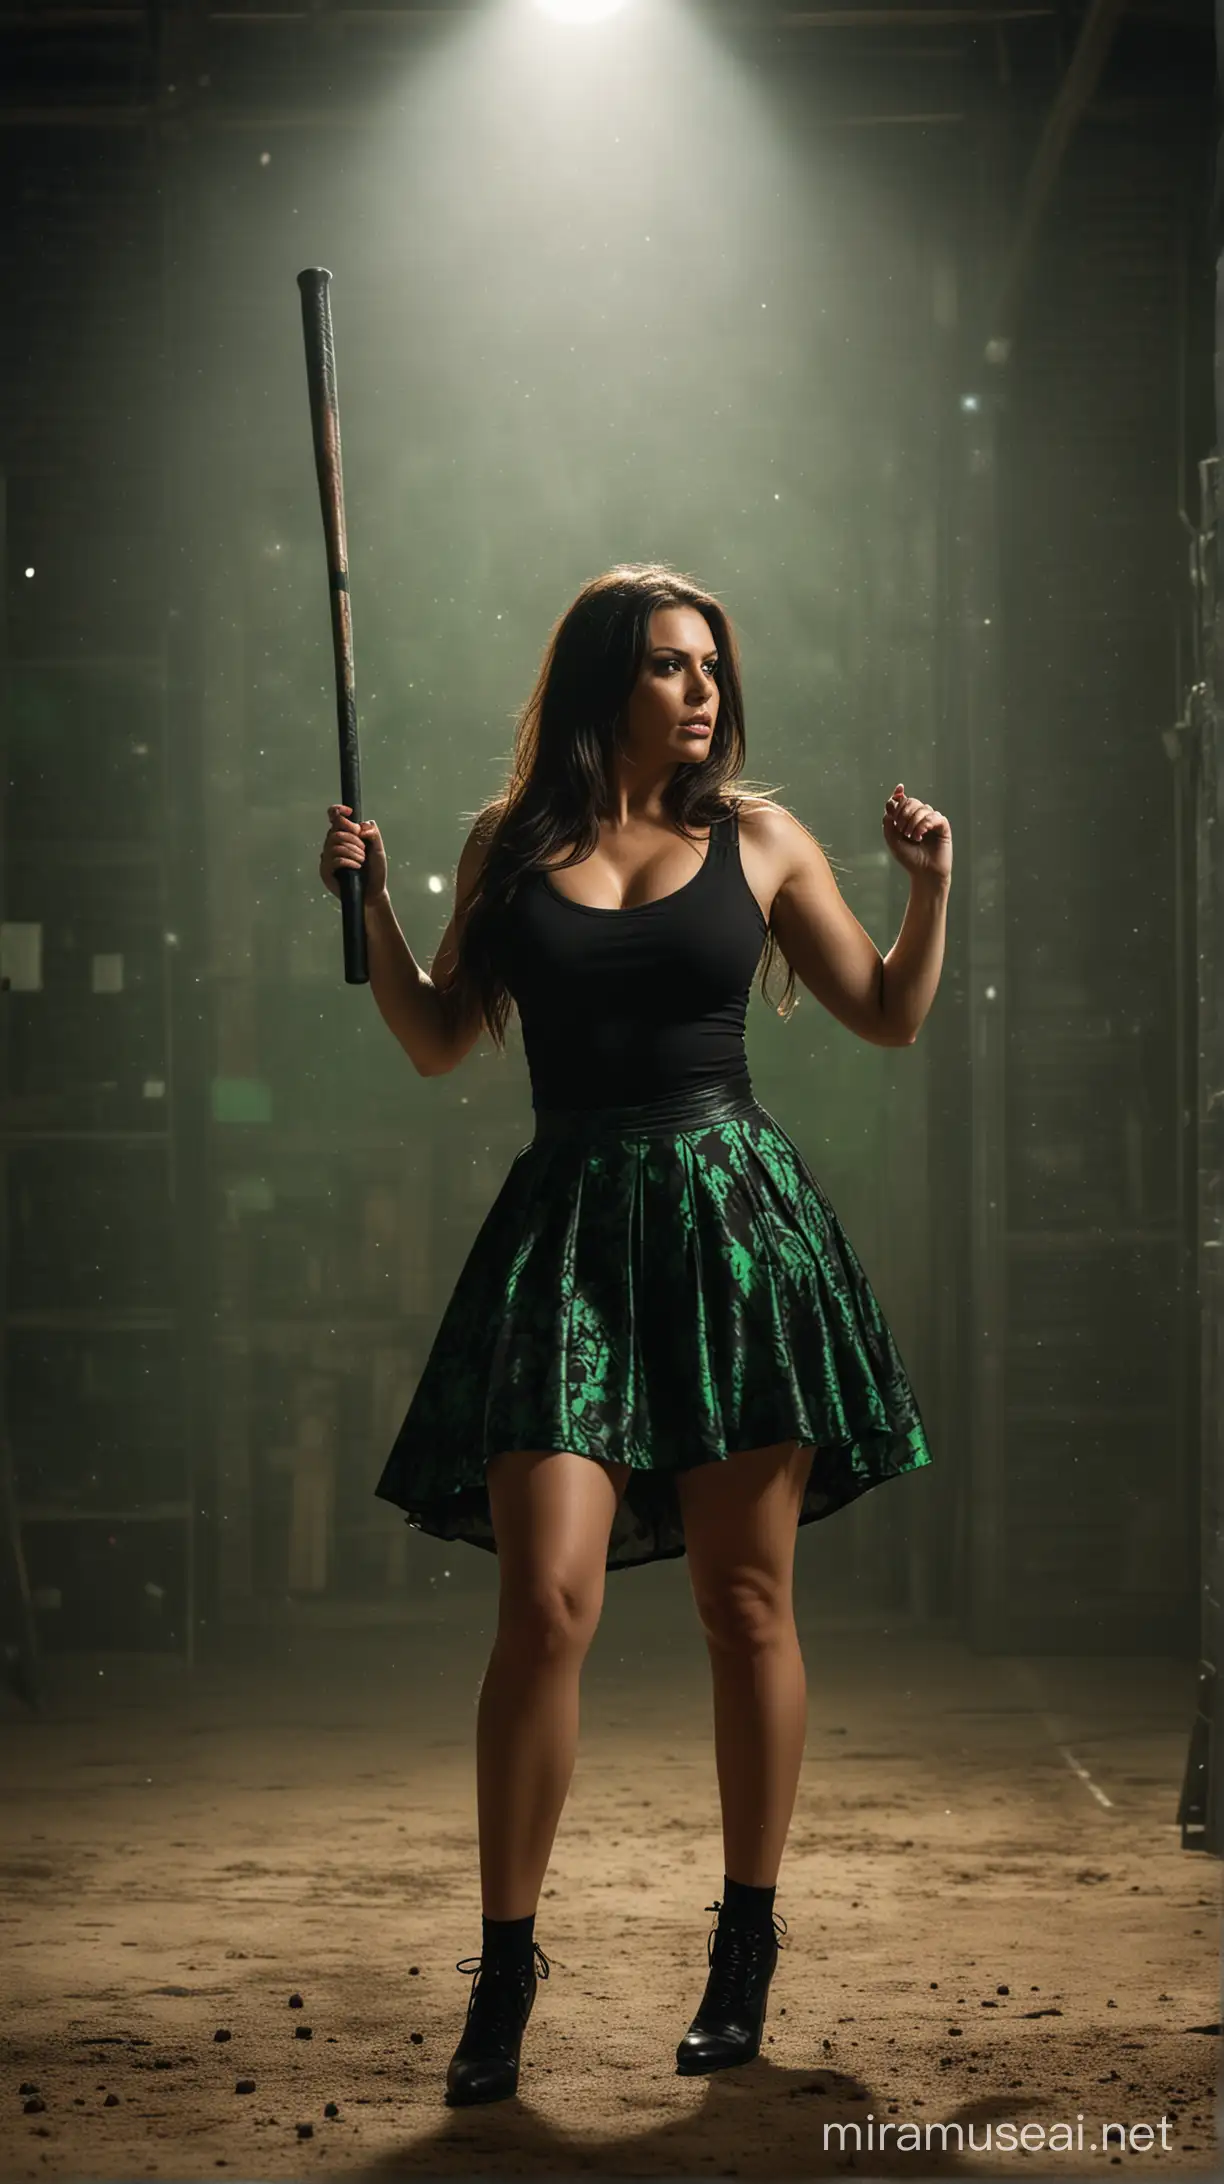 photoshoot, busty woman in black shirt with green print, black skirt, bandaged feet, long dark hair with color accents, swinging baseball bat, dark storage hall at night, noir, dramatic light, rim lights to contour body shape, blurred background, bokeh, dust in air, volumetric light